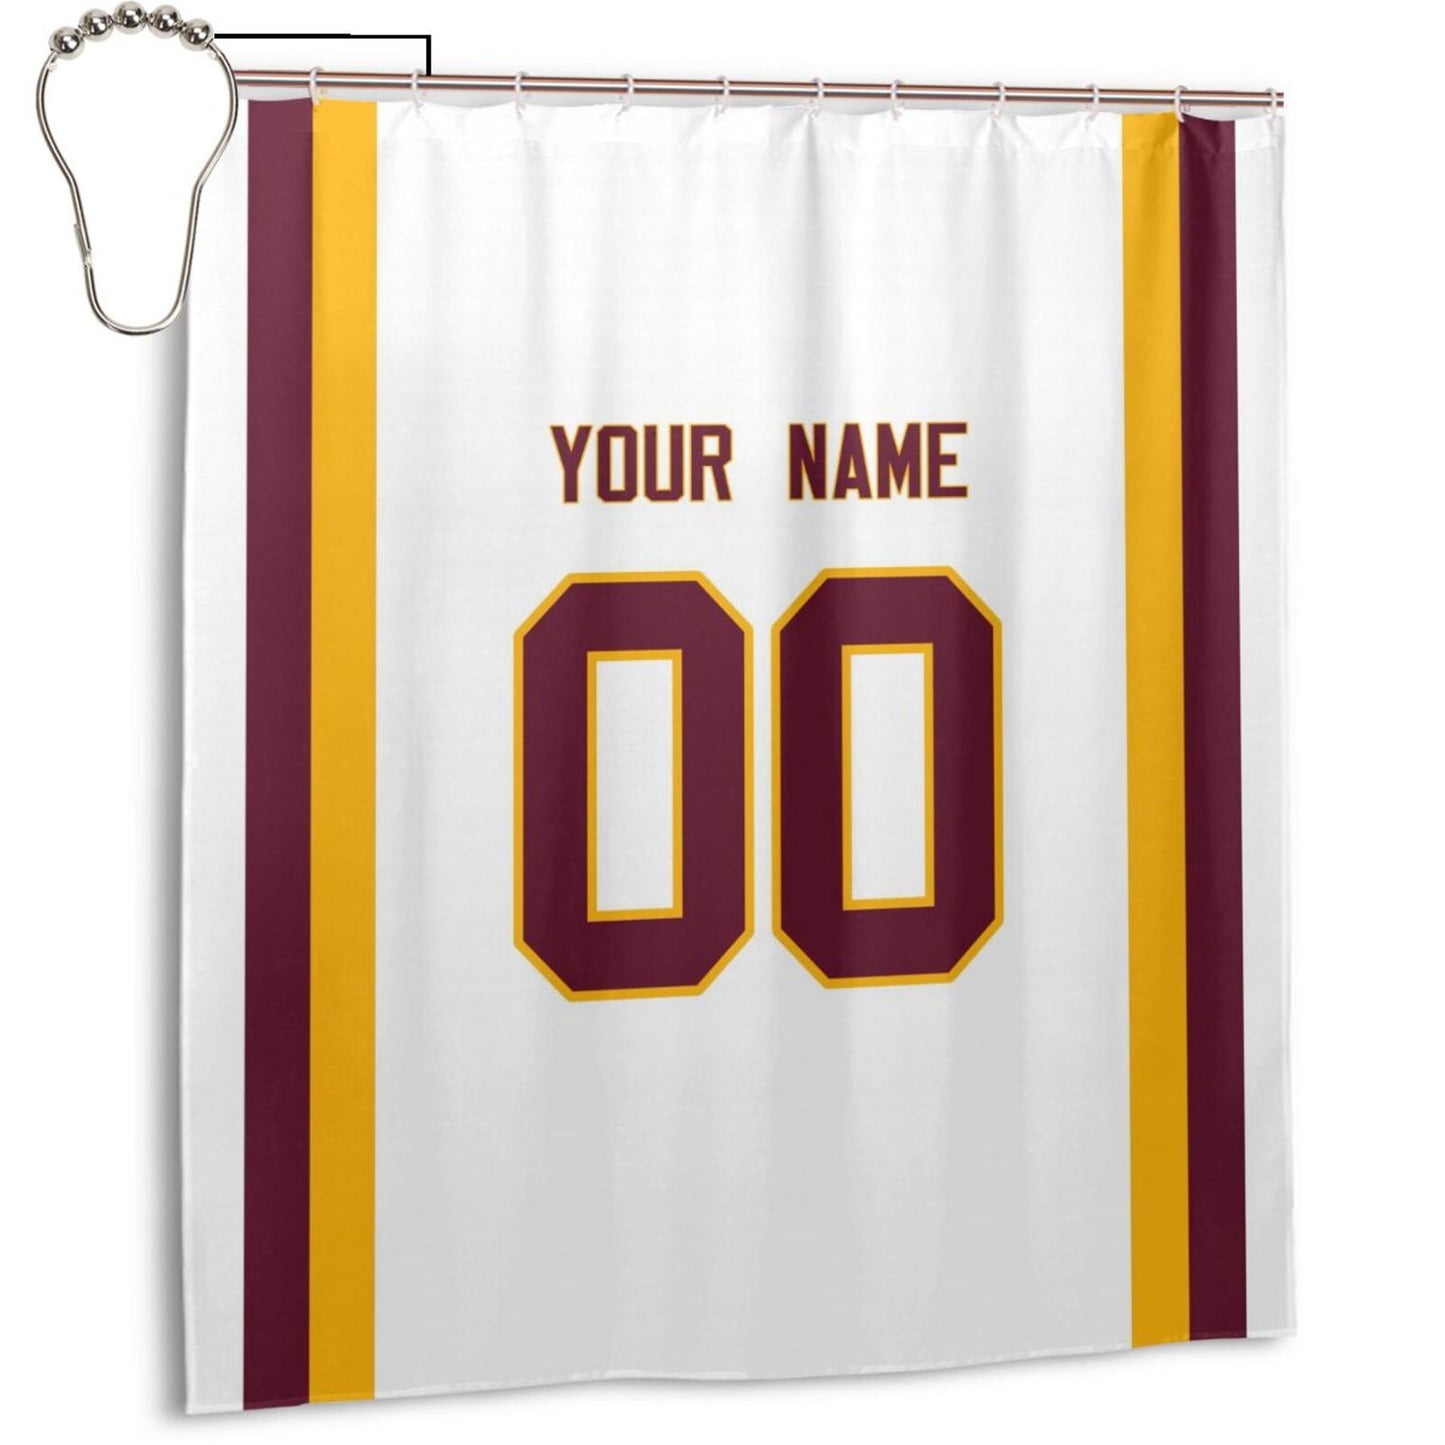 Custom Football Washington Commanders style personalized shower curtain custom design name and number set of 12 shower curtain hooks Rings